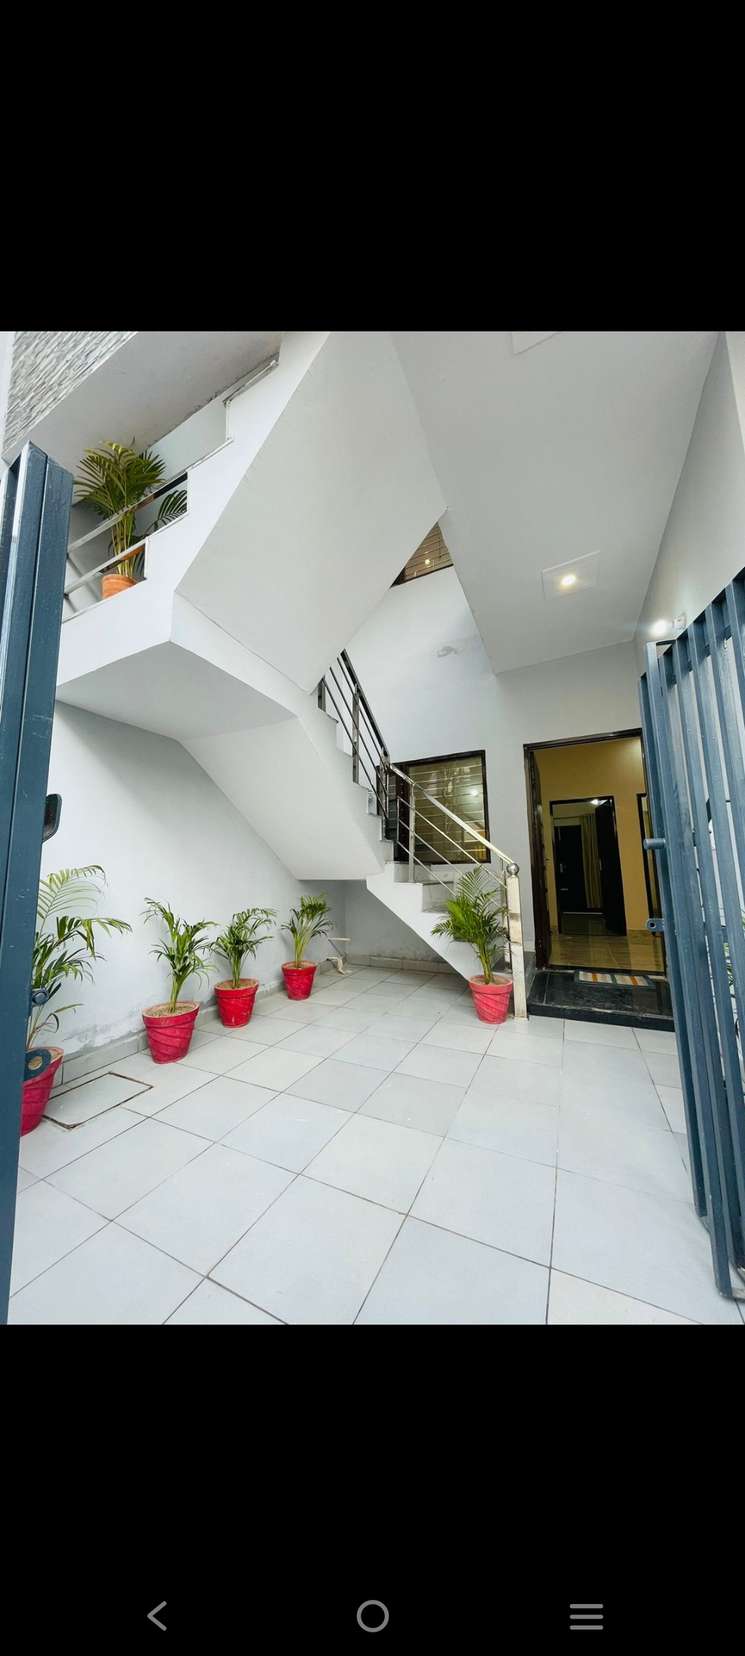 3 Bedroom 102 Sq.Yd. Independent House in Kharar Mohali